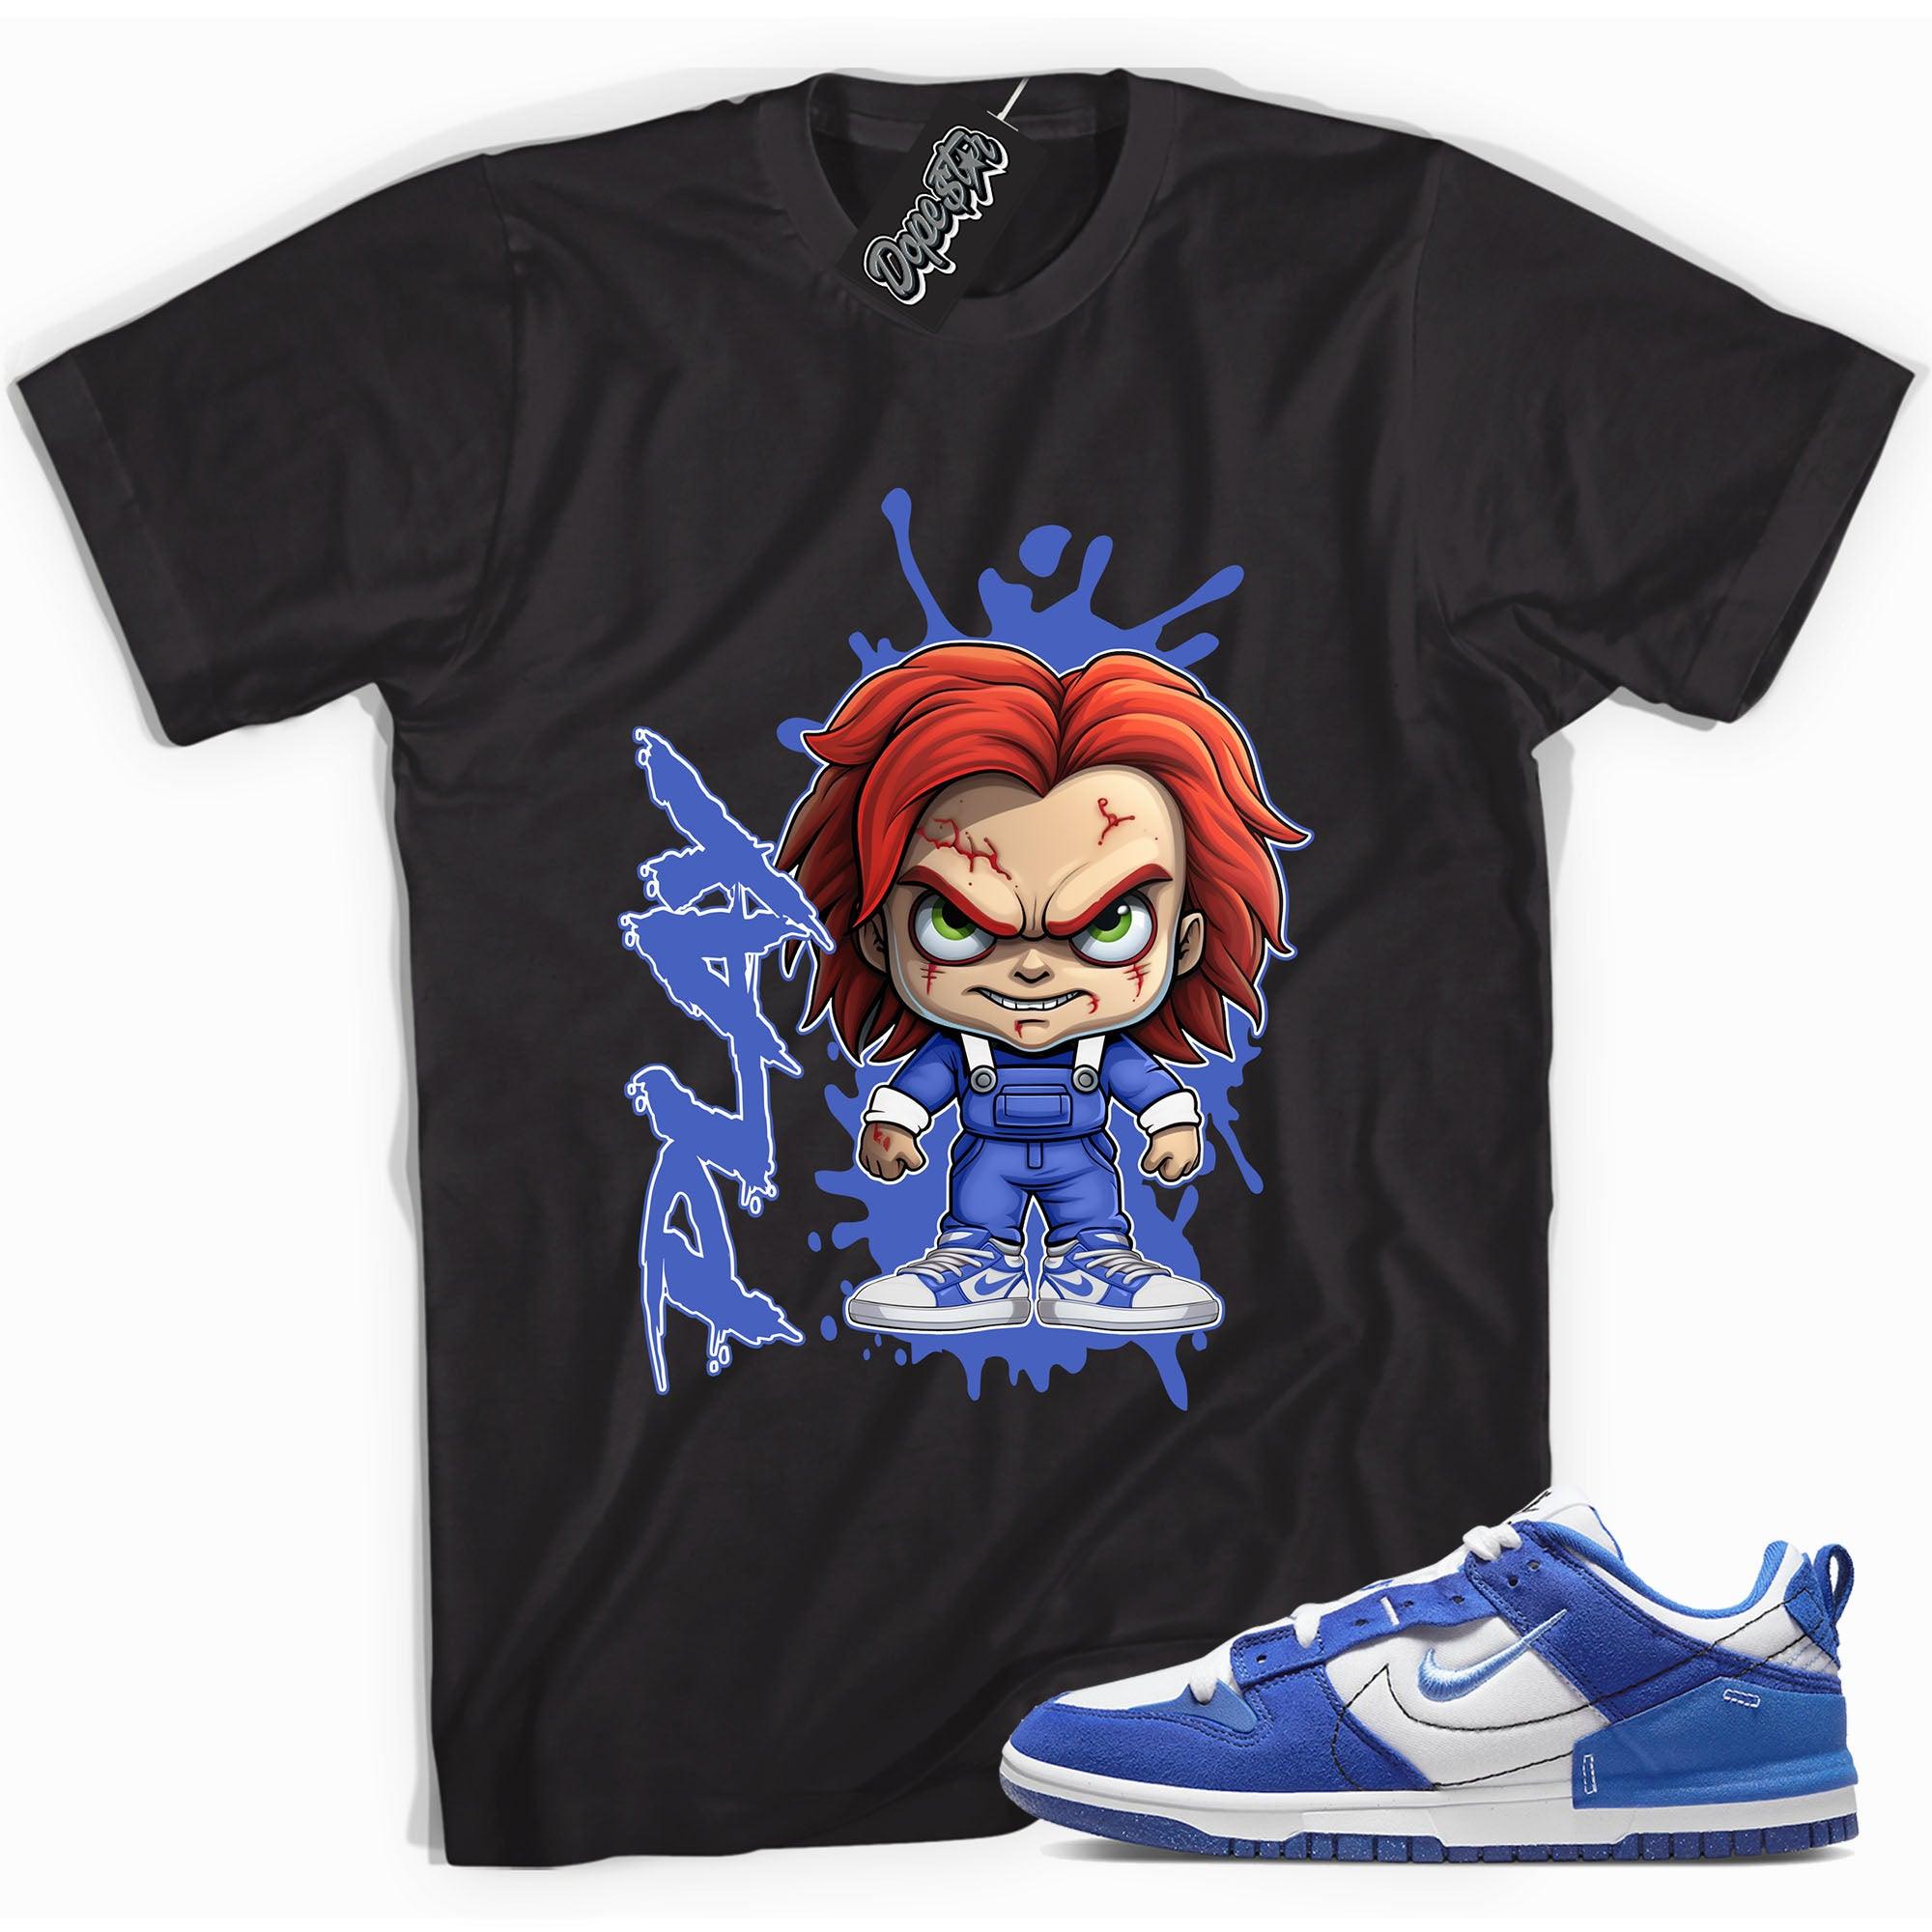 Cool Black graphic tee with “ CHUCKY PLAY ” print, that perfectly matches Nike Dunk Disrupt 2 Hyper Royal sneakers 